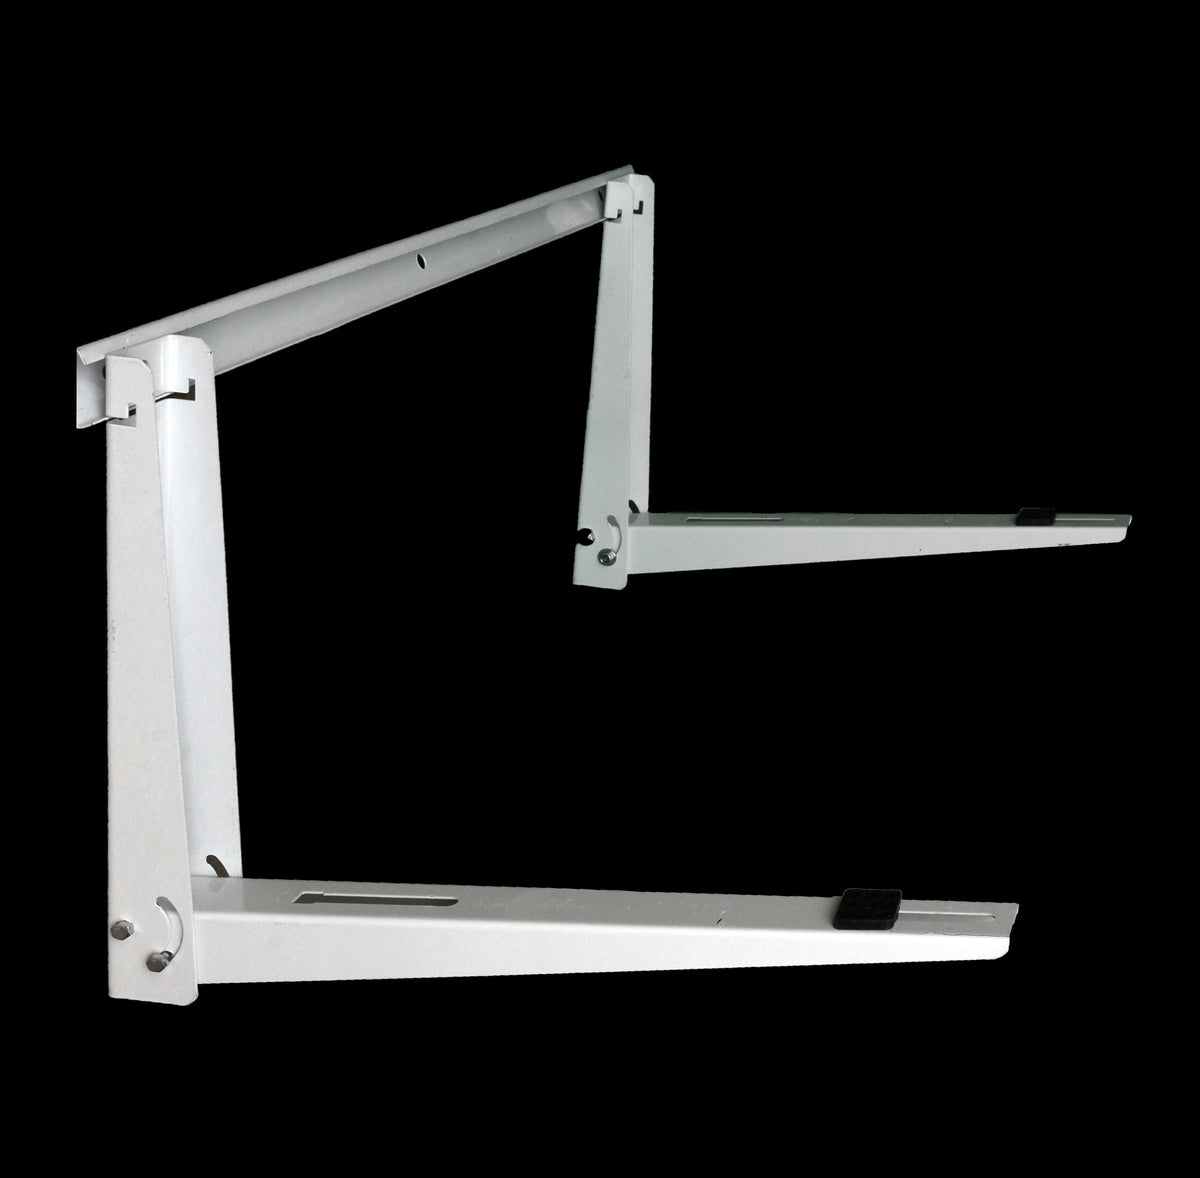 Universal Outdoor Mini Split Mounting Bracket For Heat Pump Systems Up To 500lbs, 9000-36000 BTUs With Installation Kits &amp; Hardware Included, Steel &amp; Powder-Coated